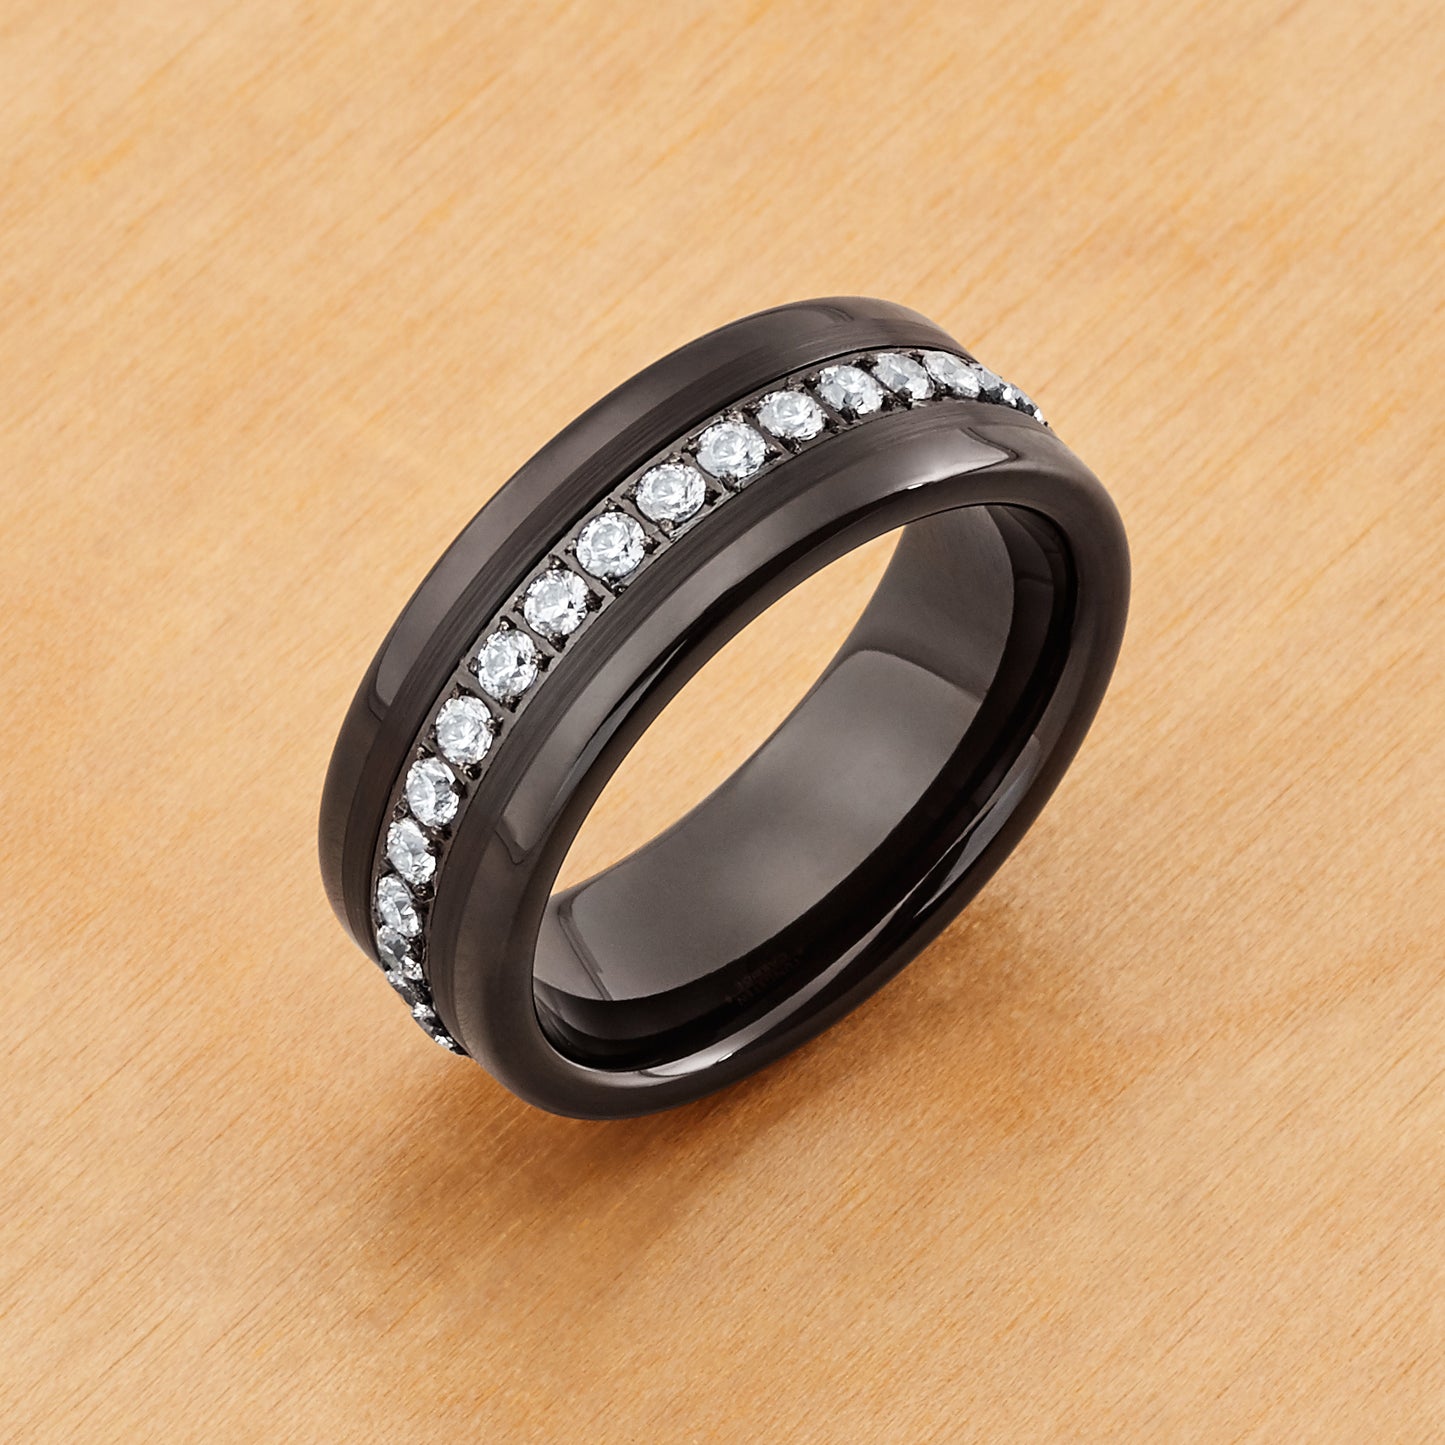 TR773 - Black Plating - Tungsten Ring 8mm, Prong-set Round White CZs Eternity Band Black IP Plated Brush Finish Low Stepped Edge